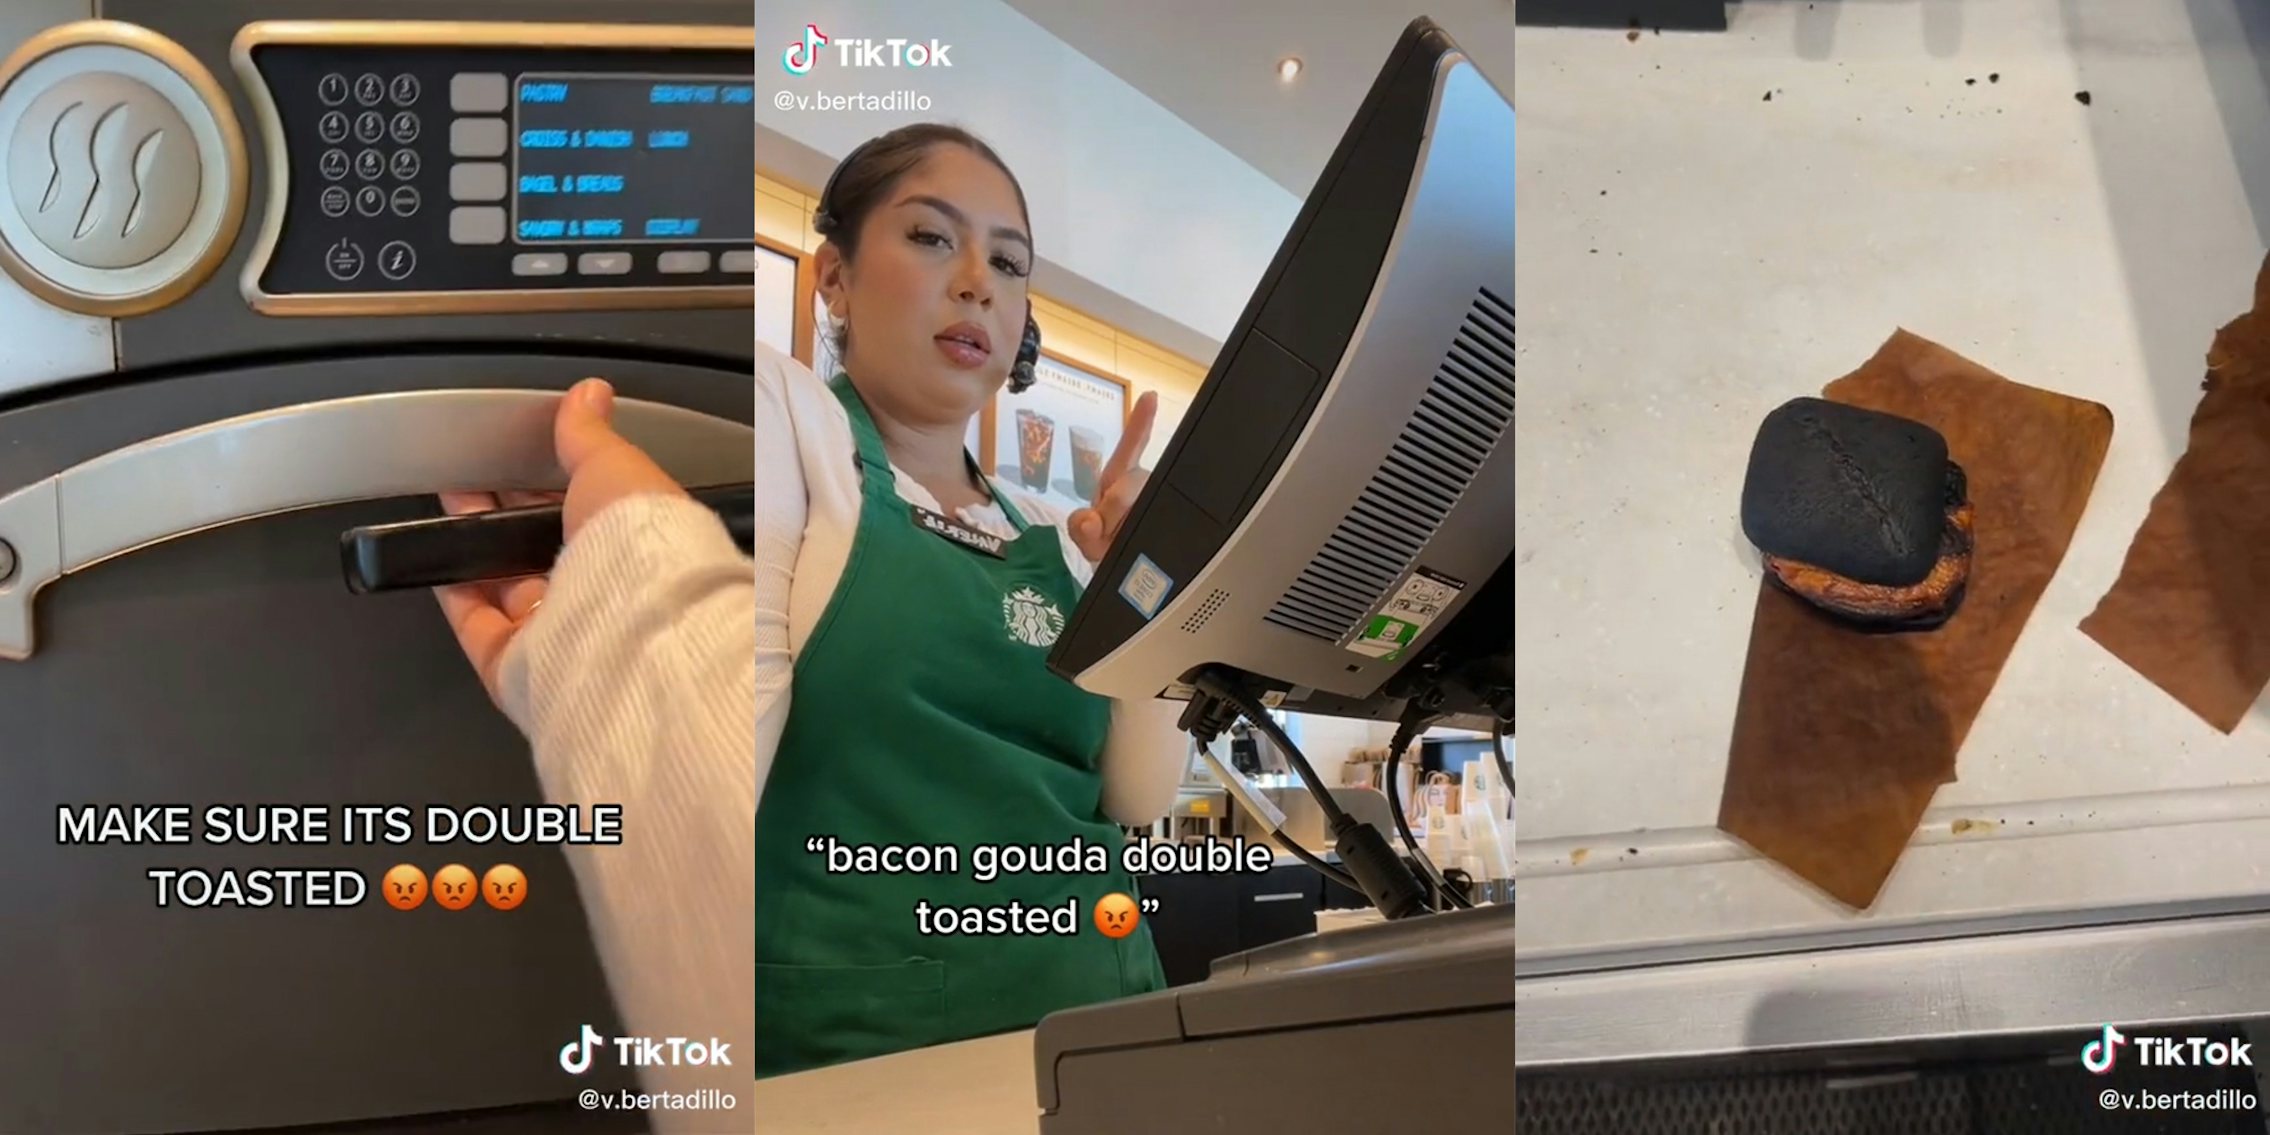 hand operating oven with caption 'make sure its double toasted' (l) young woman in starbuck uniform with caption 'bacon gouda double toasted' (c) burnt sandwich on counter (r)